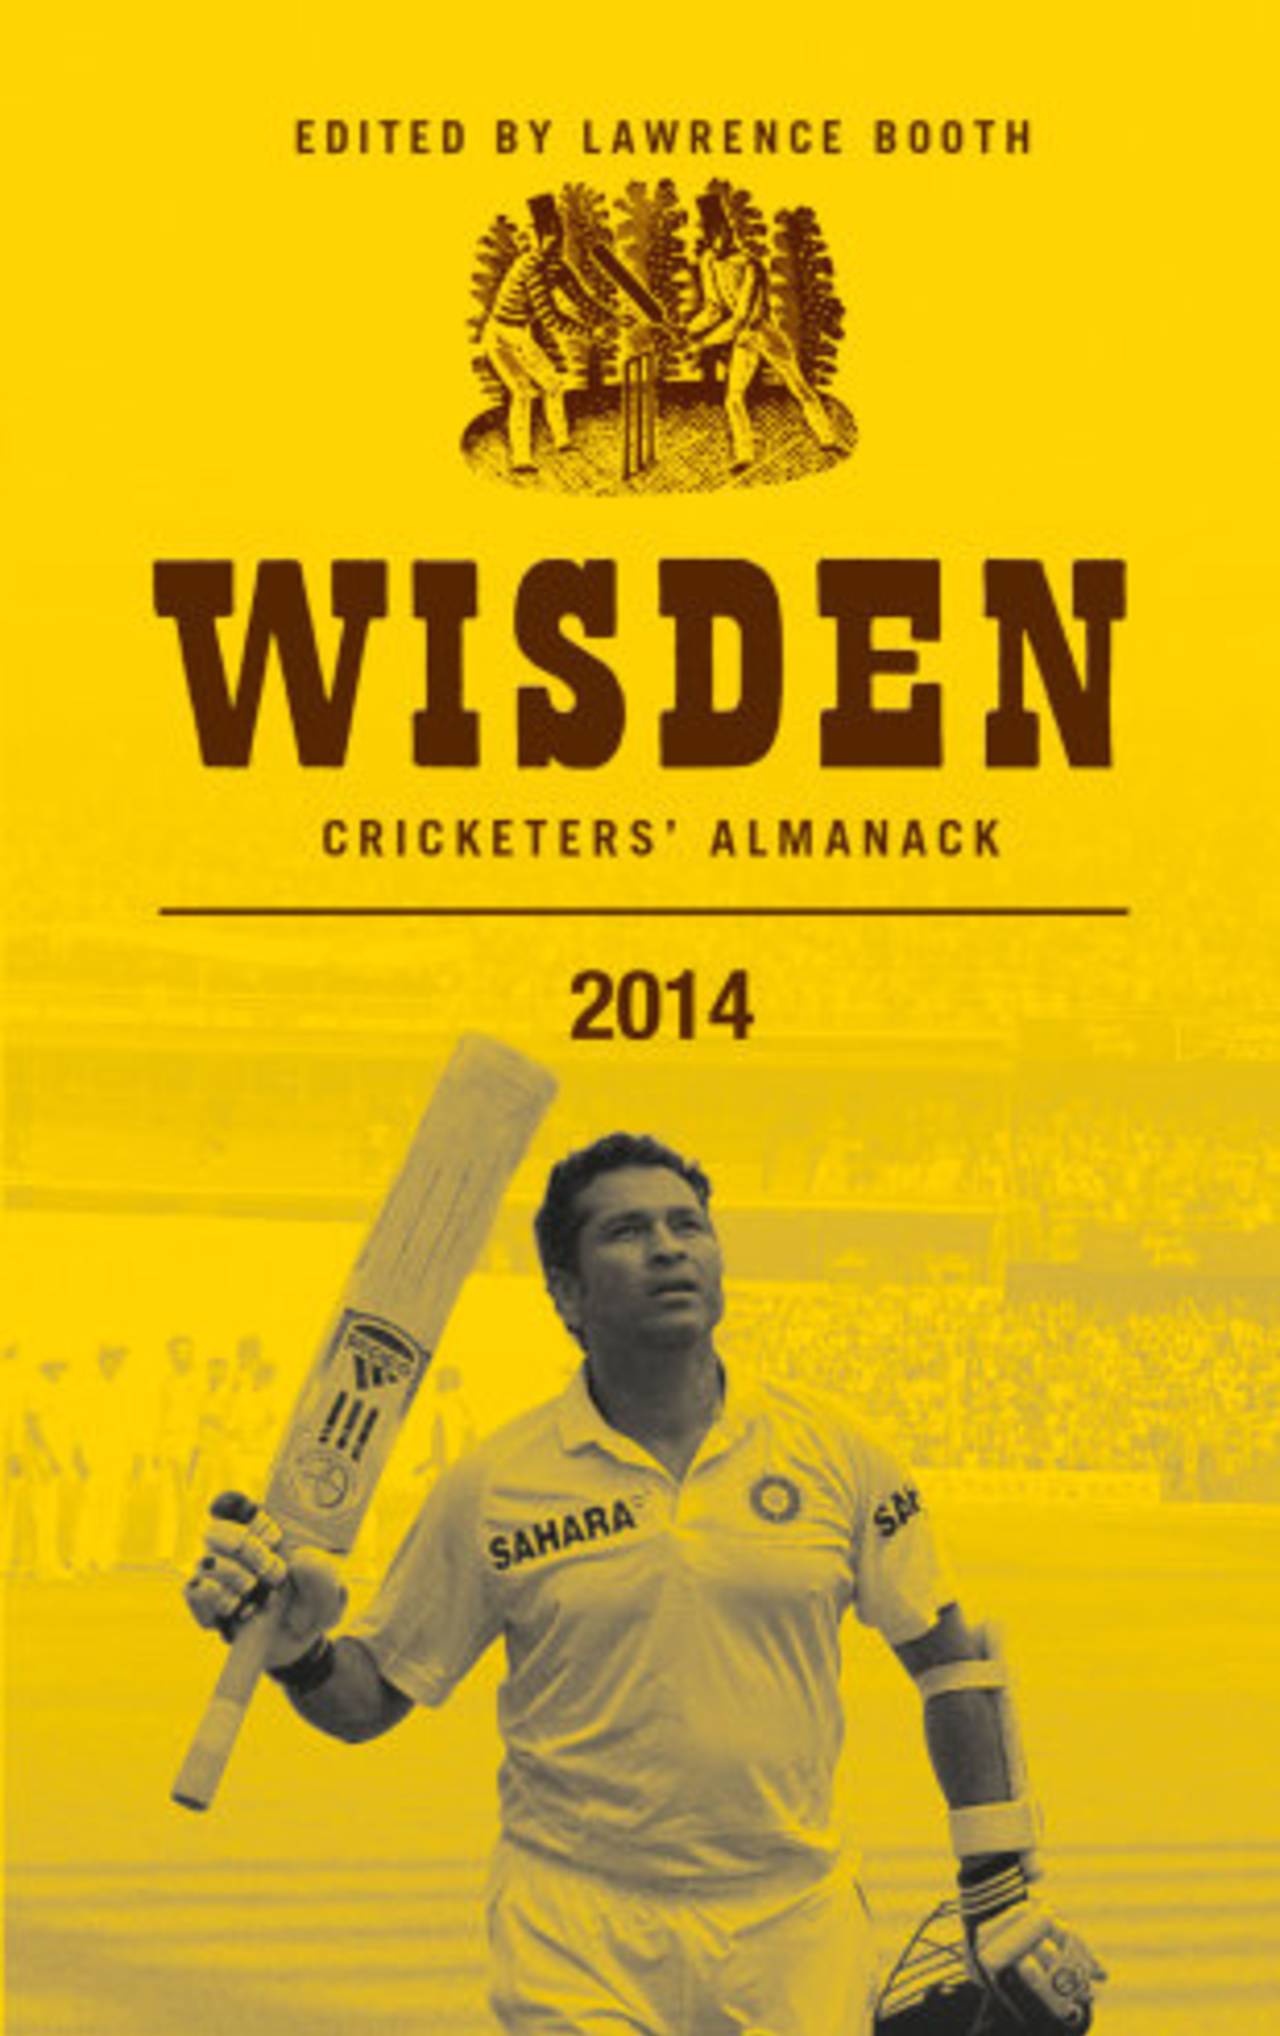 For their cover, Wisden went with the man who played international cricket for nearly a quarter of a century&nbsp;&nbsp;&bull;&nbsp;&nbsp;John Wisden & Co